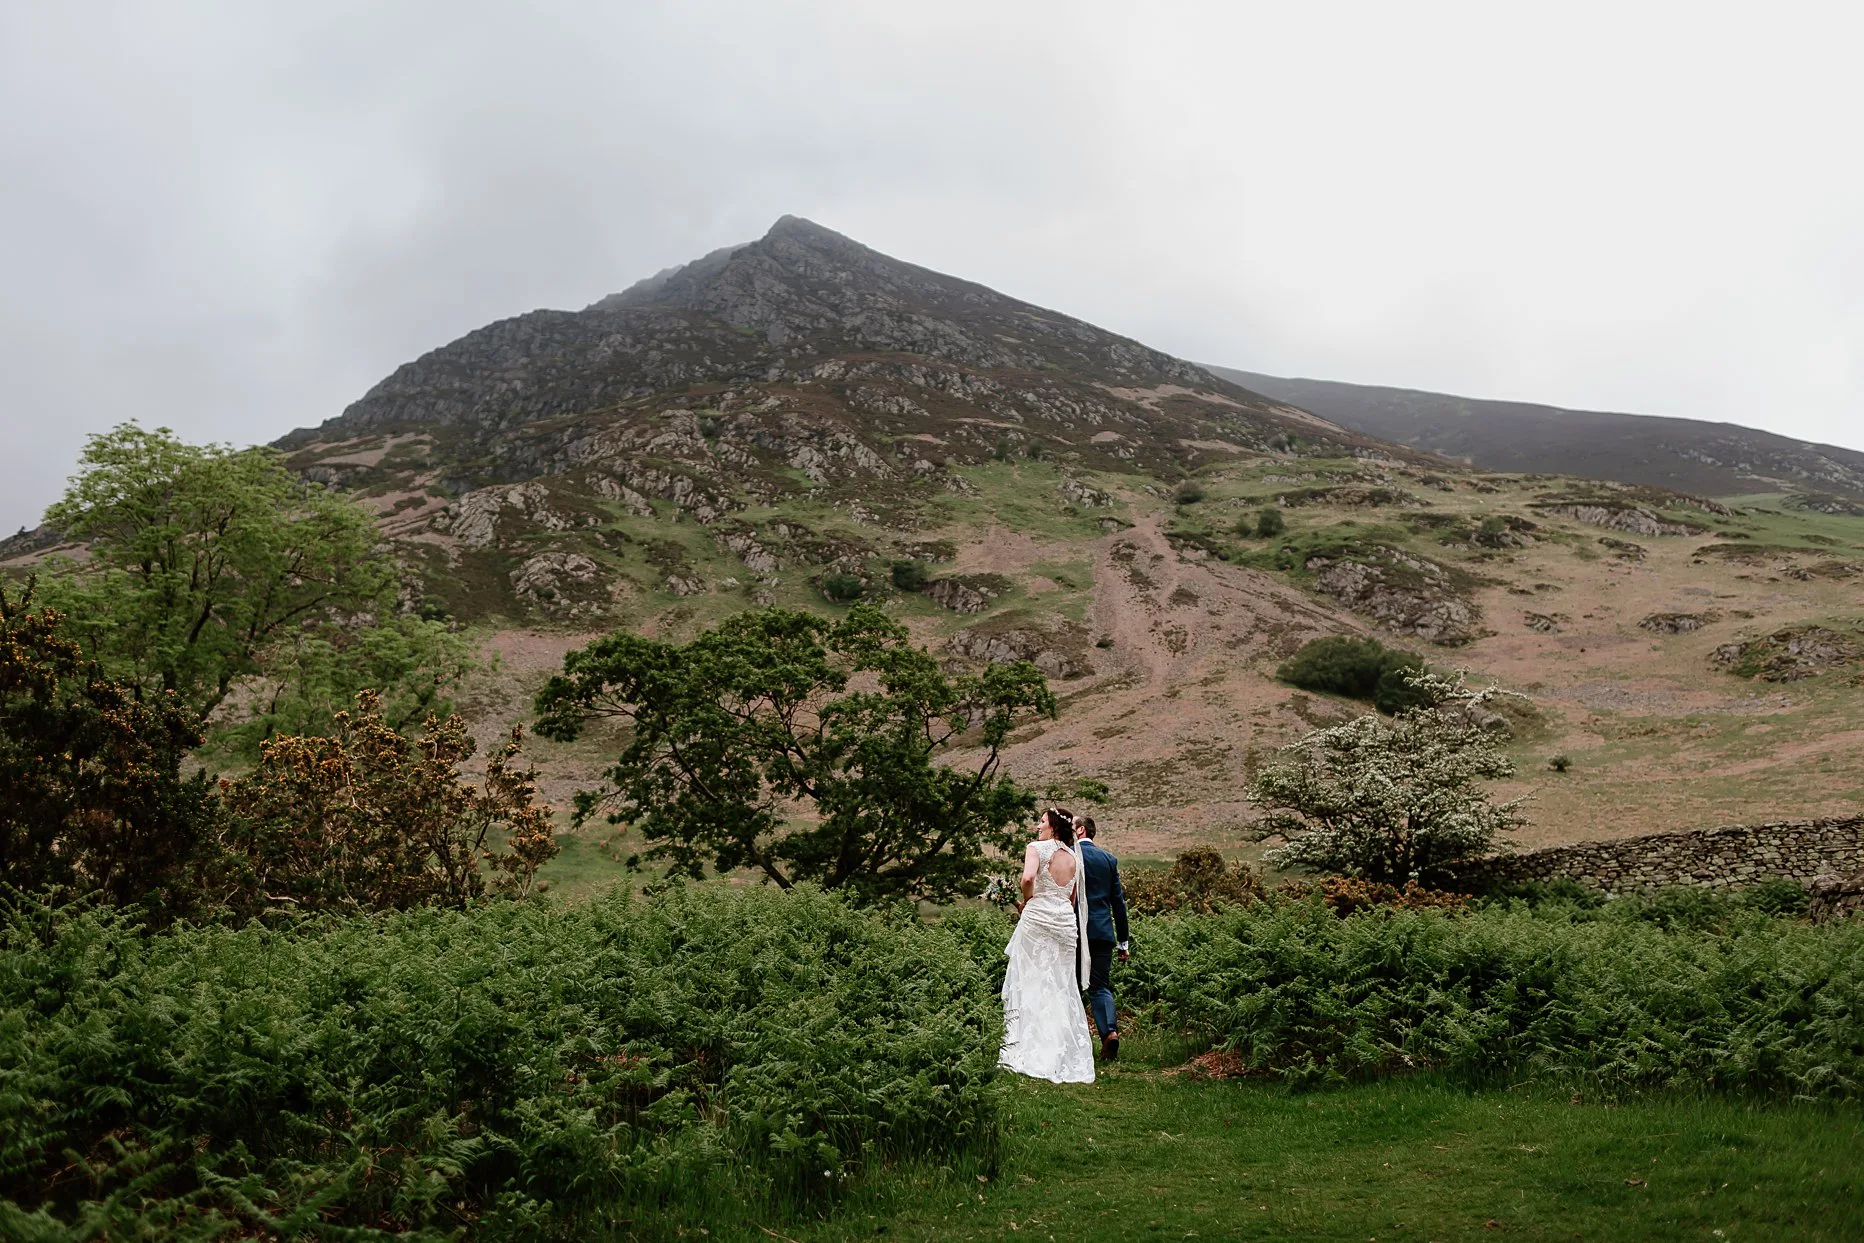 Bride and groom walking through cumbria surrounded by hills and mountains of the Lake District.